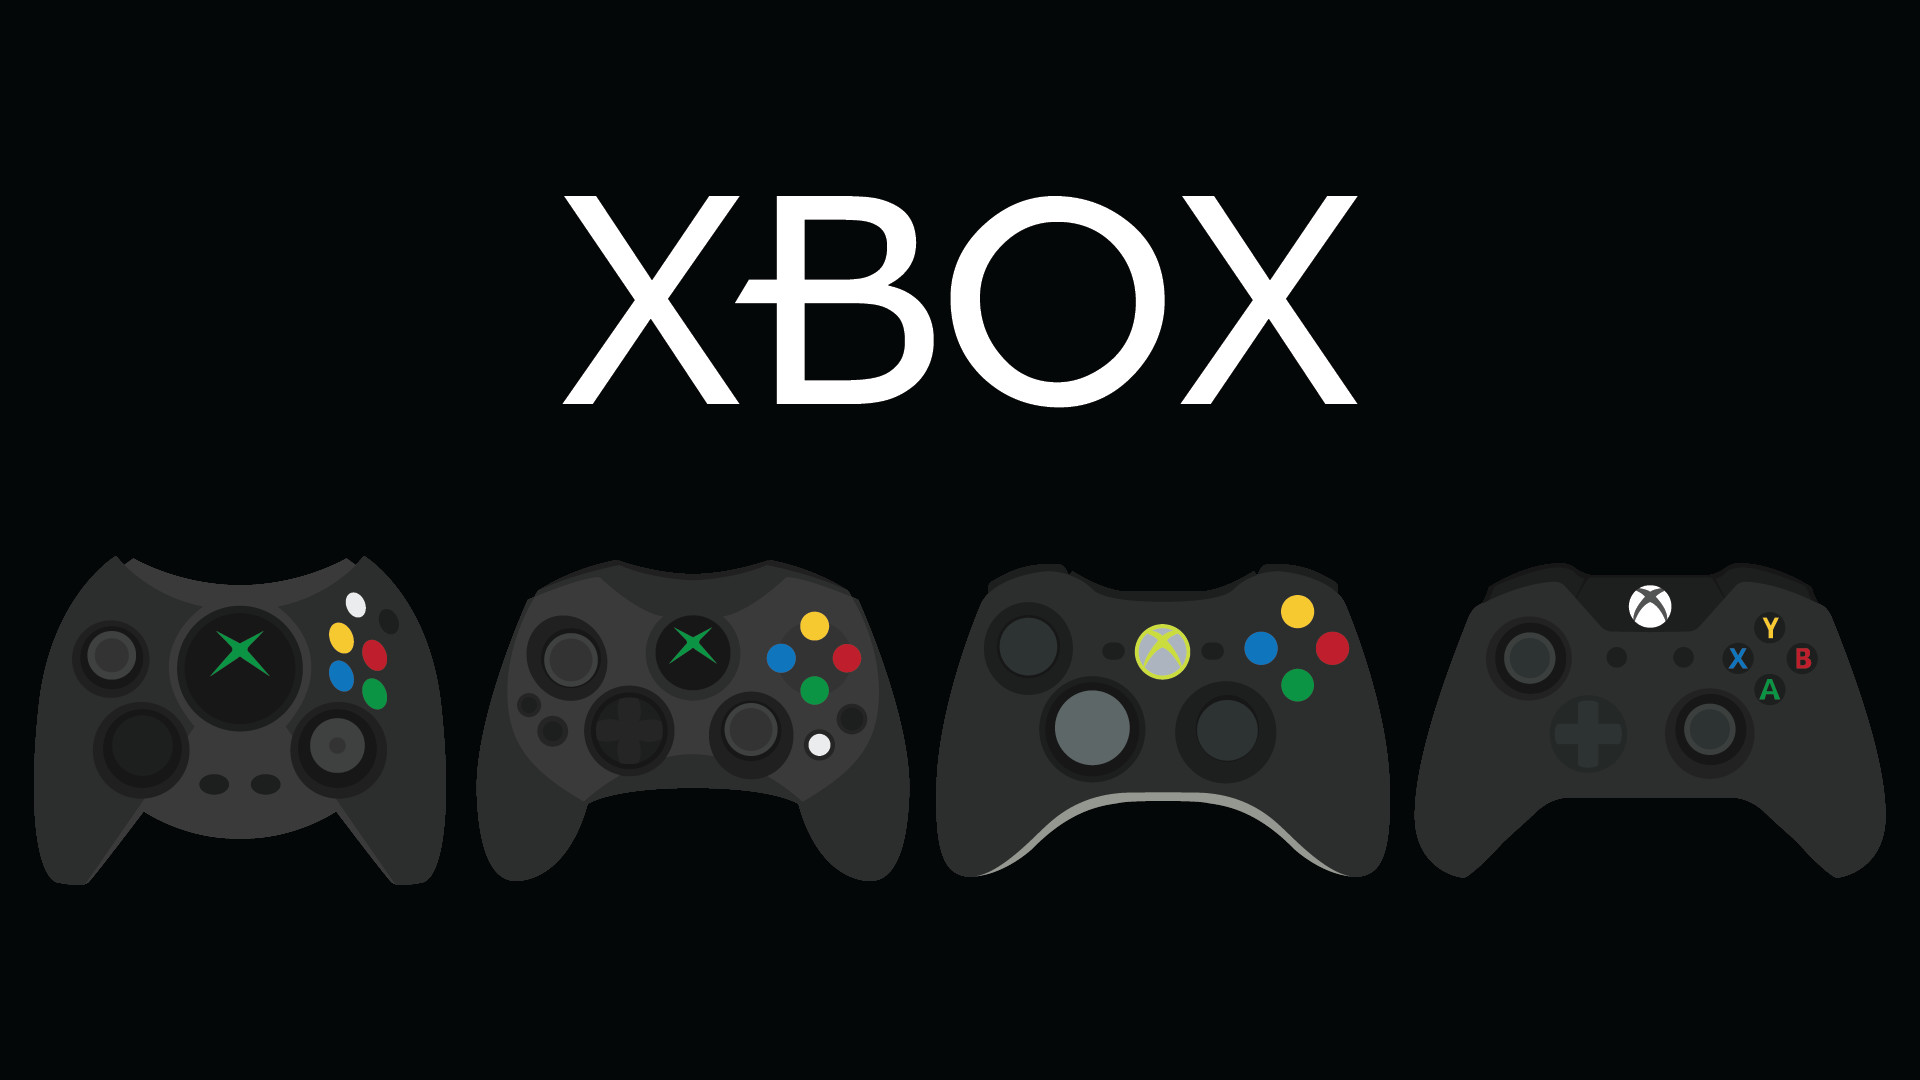 1920x1080 Awesome Xbox Pics Xbox Wallpapers Â· X BoxXbox 360Hd BackgroundsConsoles